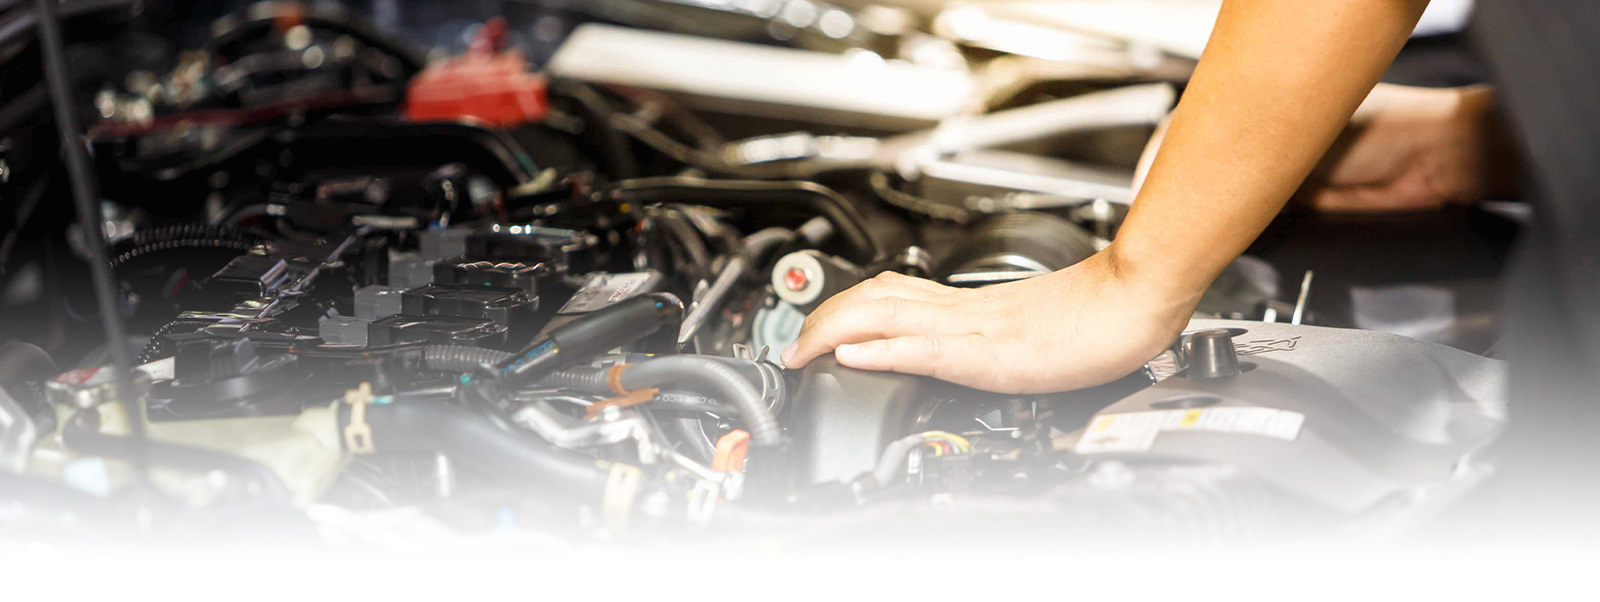 The experts at A Action Services, LLC has over 27 years of experience providing stellar service for vehicles in the Colorado Springs, Colorado area.